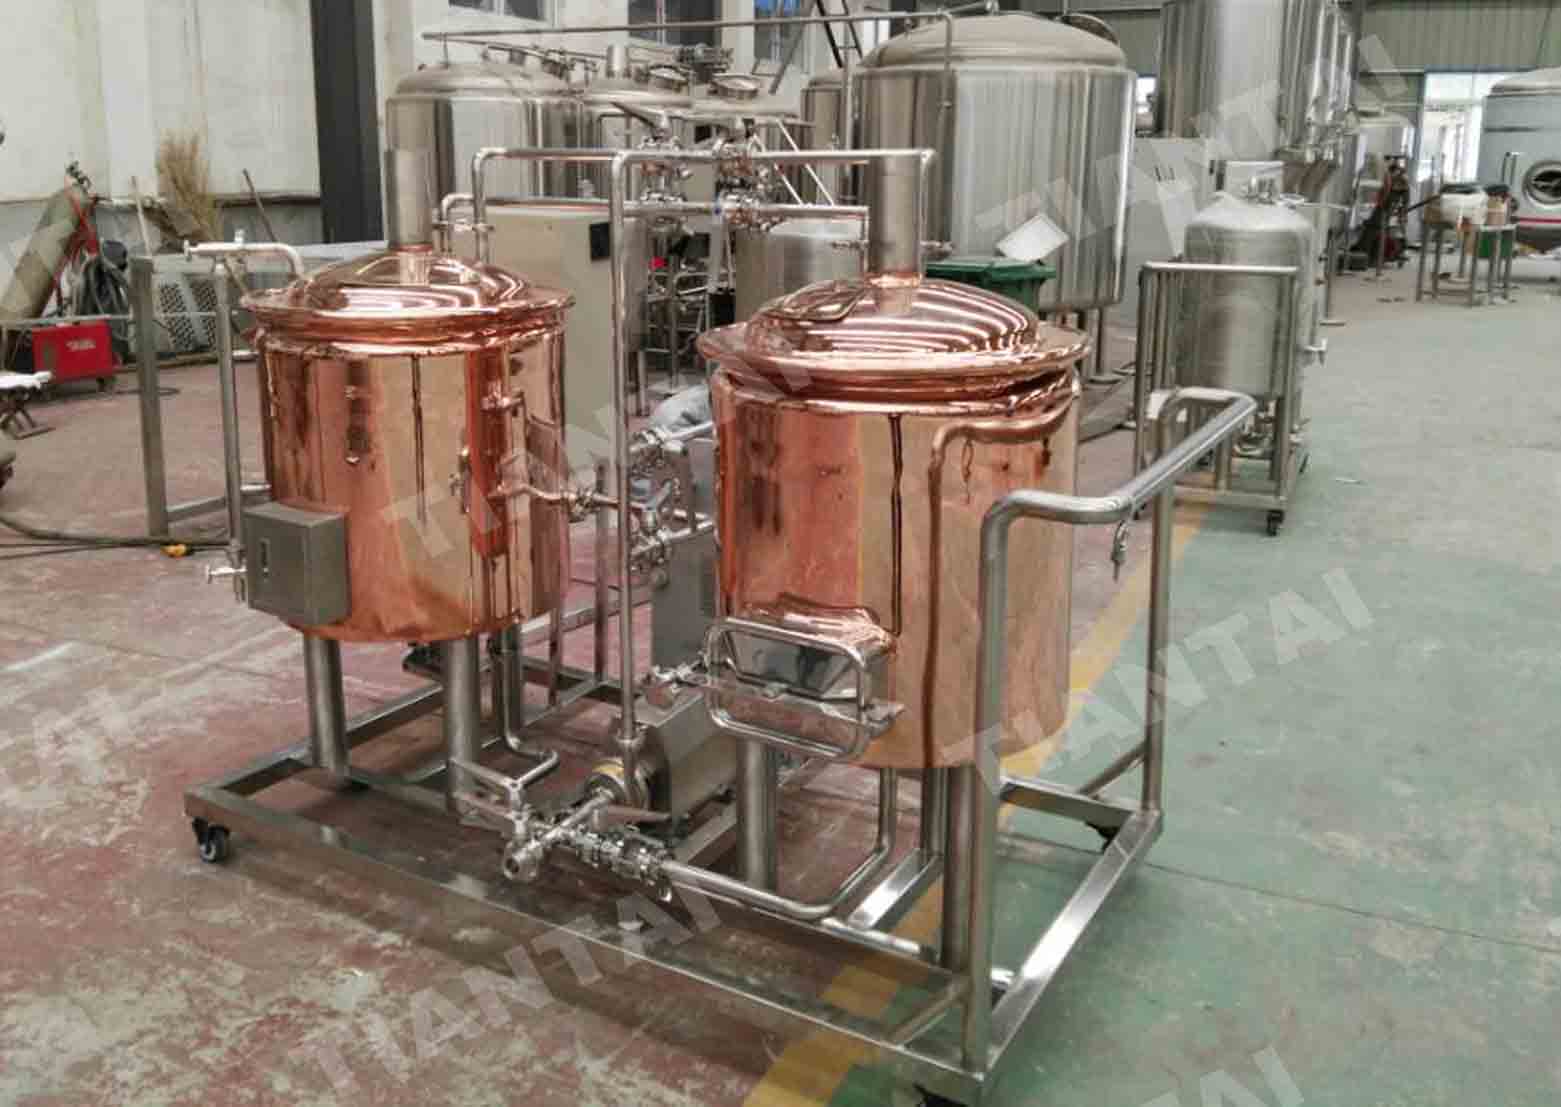 Small batch luxury red copper beer brewing tanks before